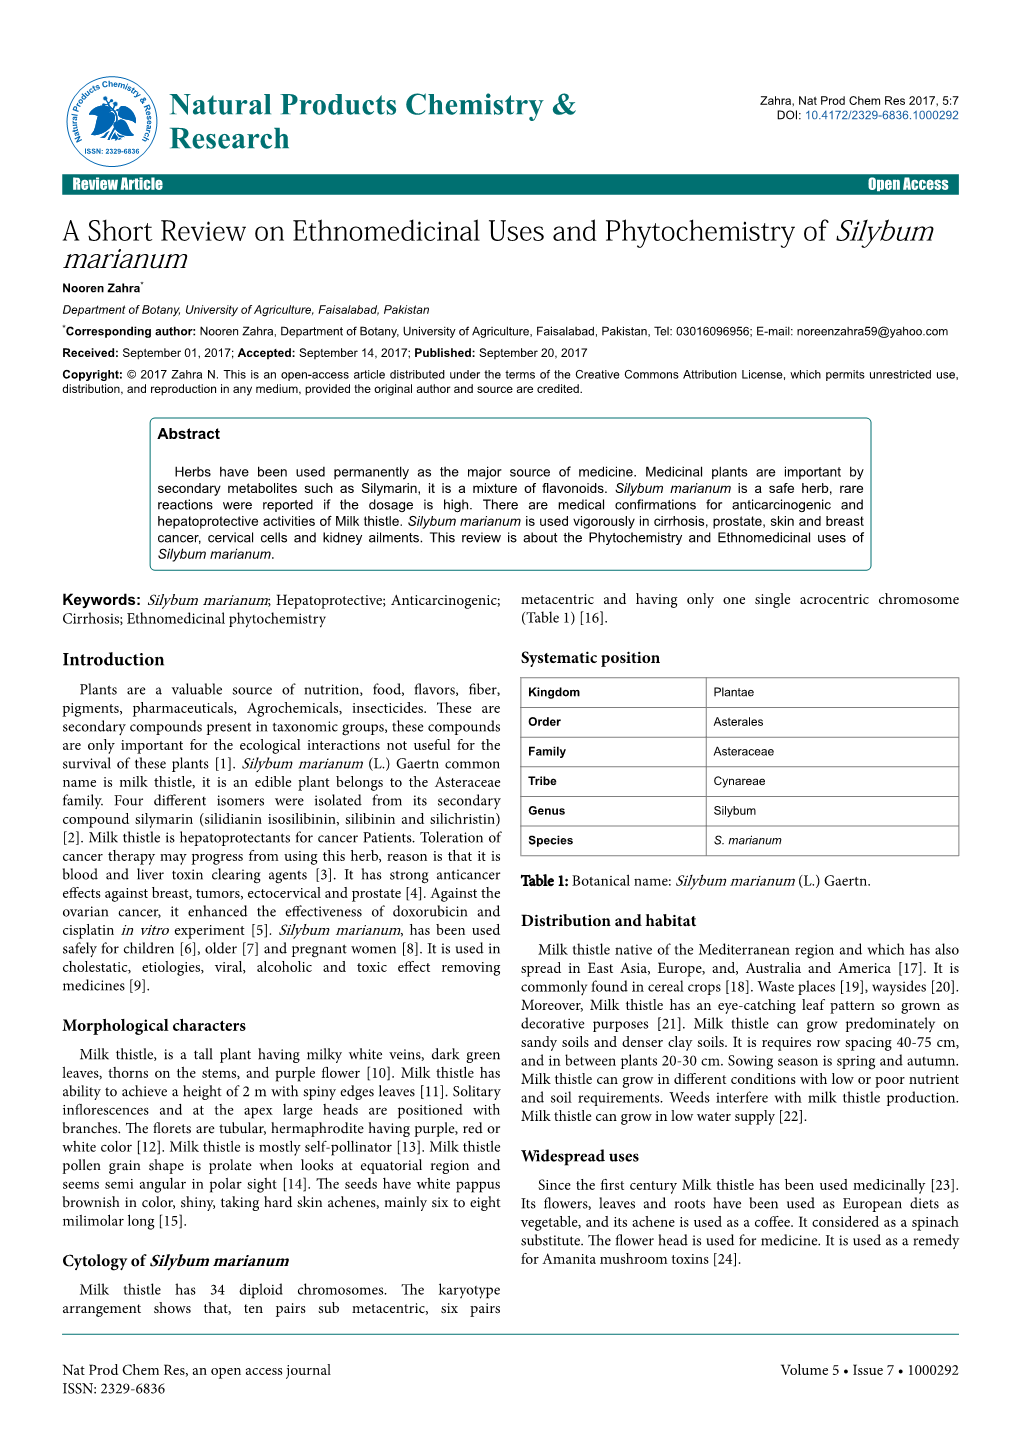 A Short Review on Ethnomedicinal Uses and Phytochemistry Of